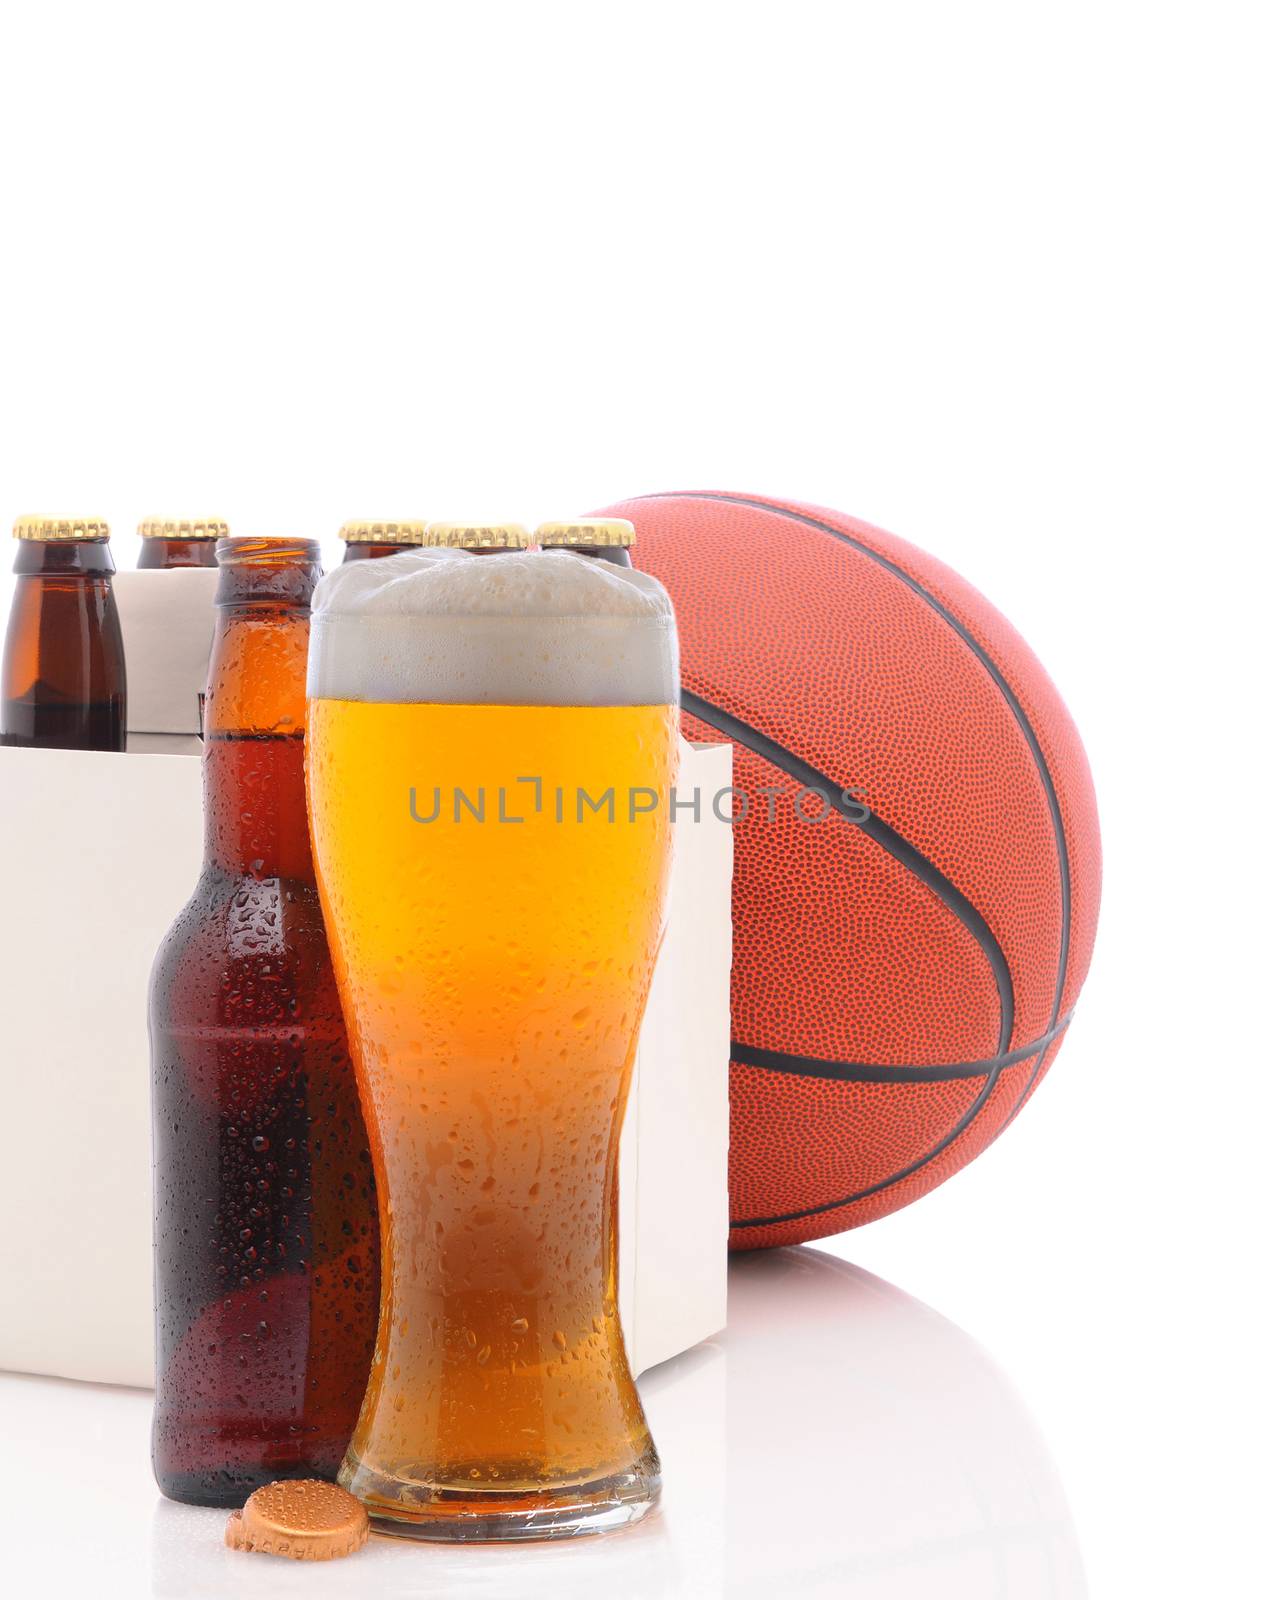 Basketball Six Pack and Glass of Beer by sCukrov